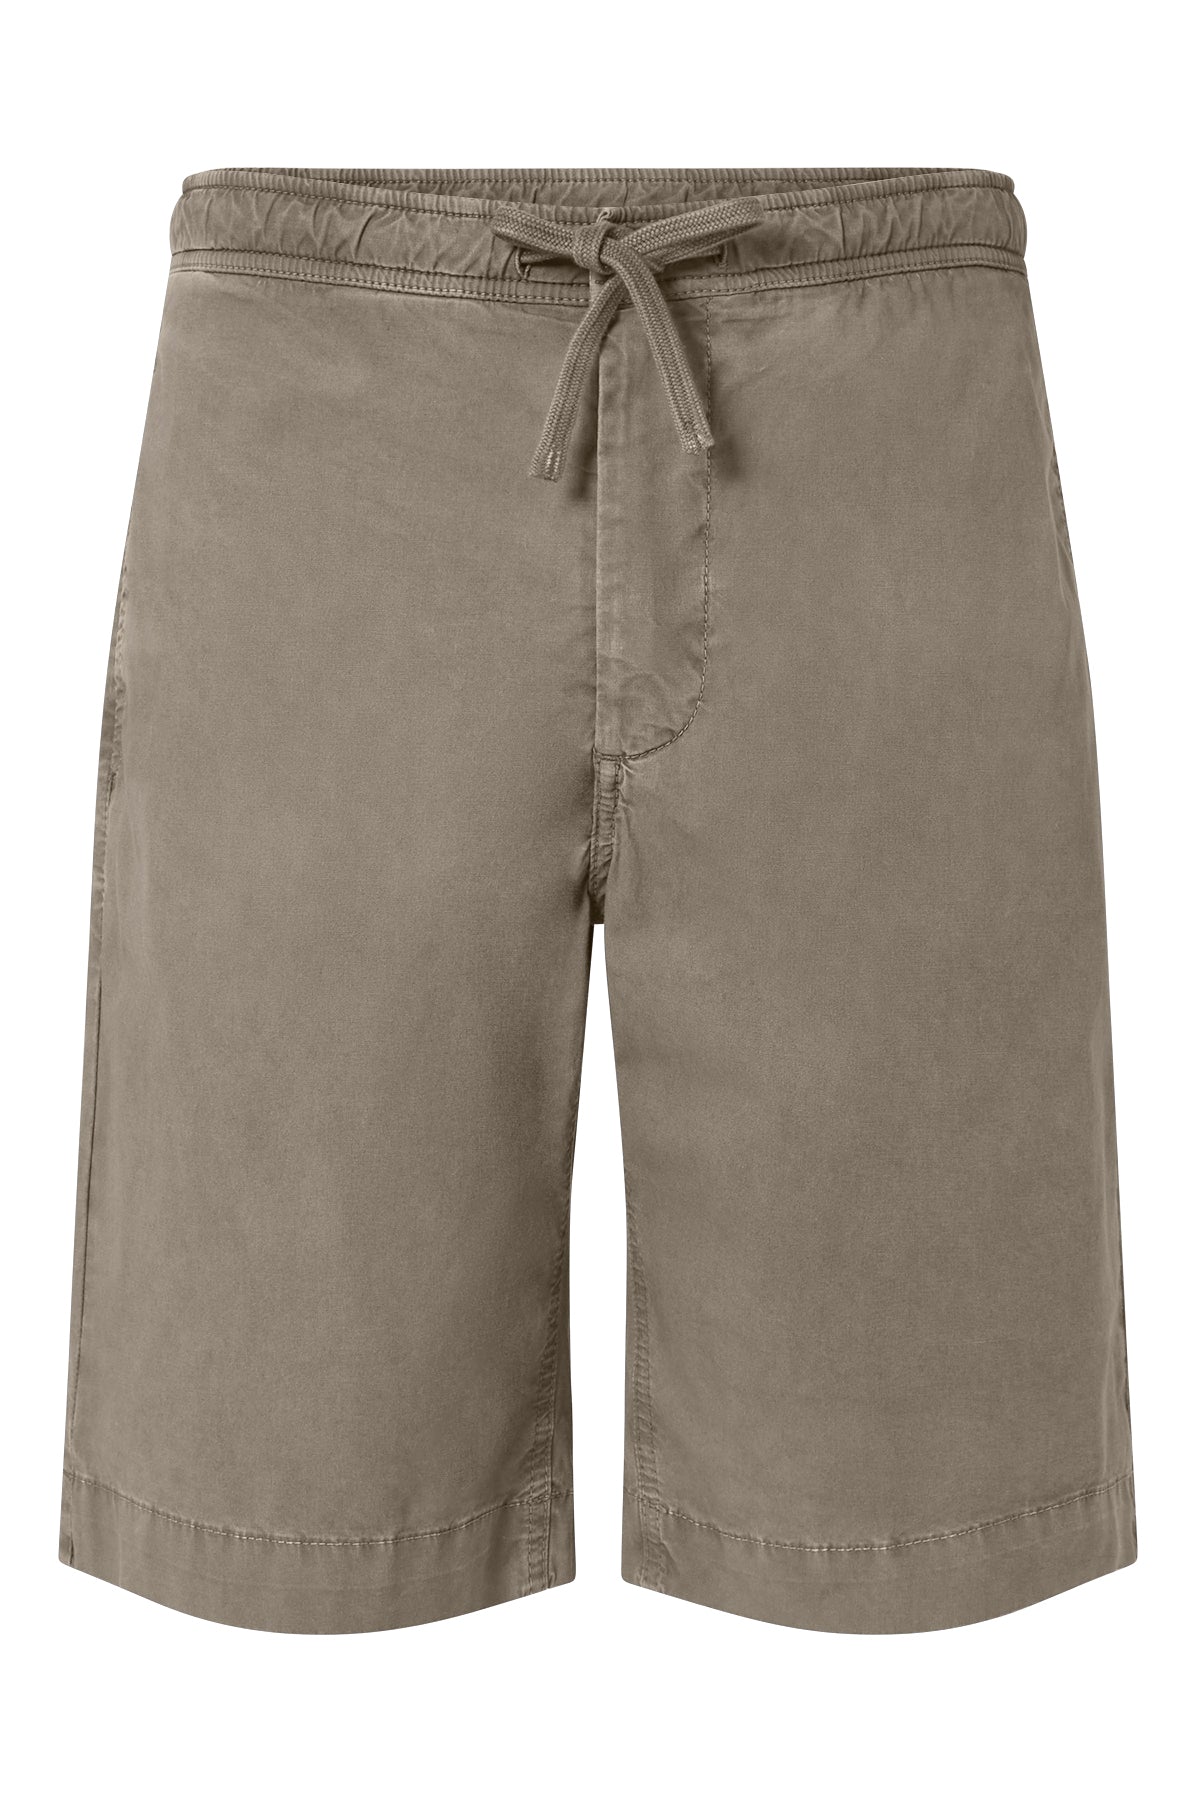 TAUPE ETHICA SHORTS